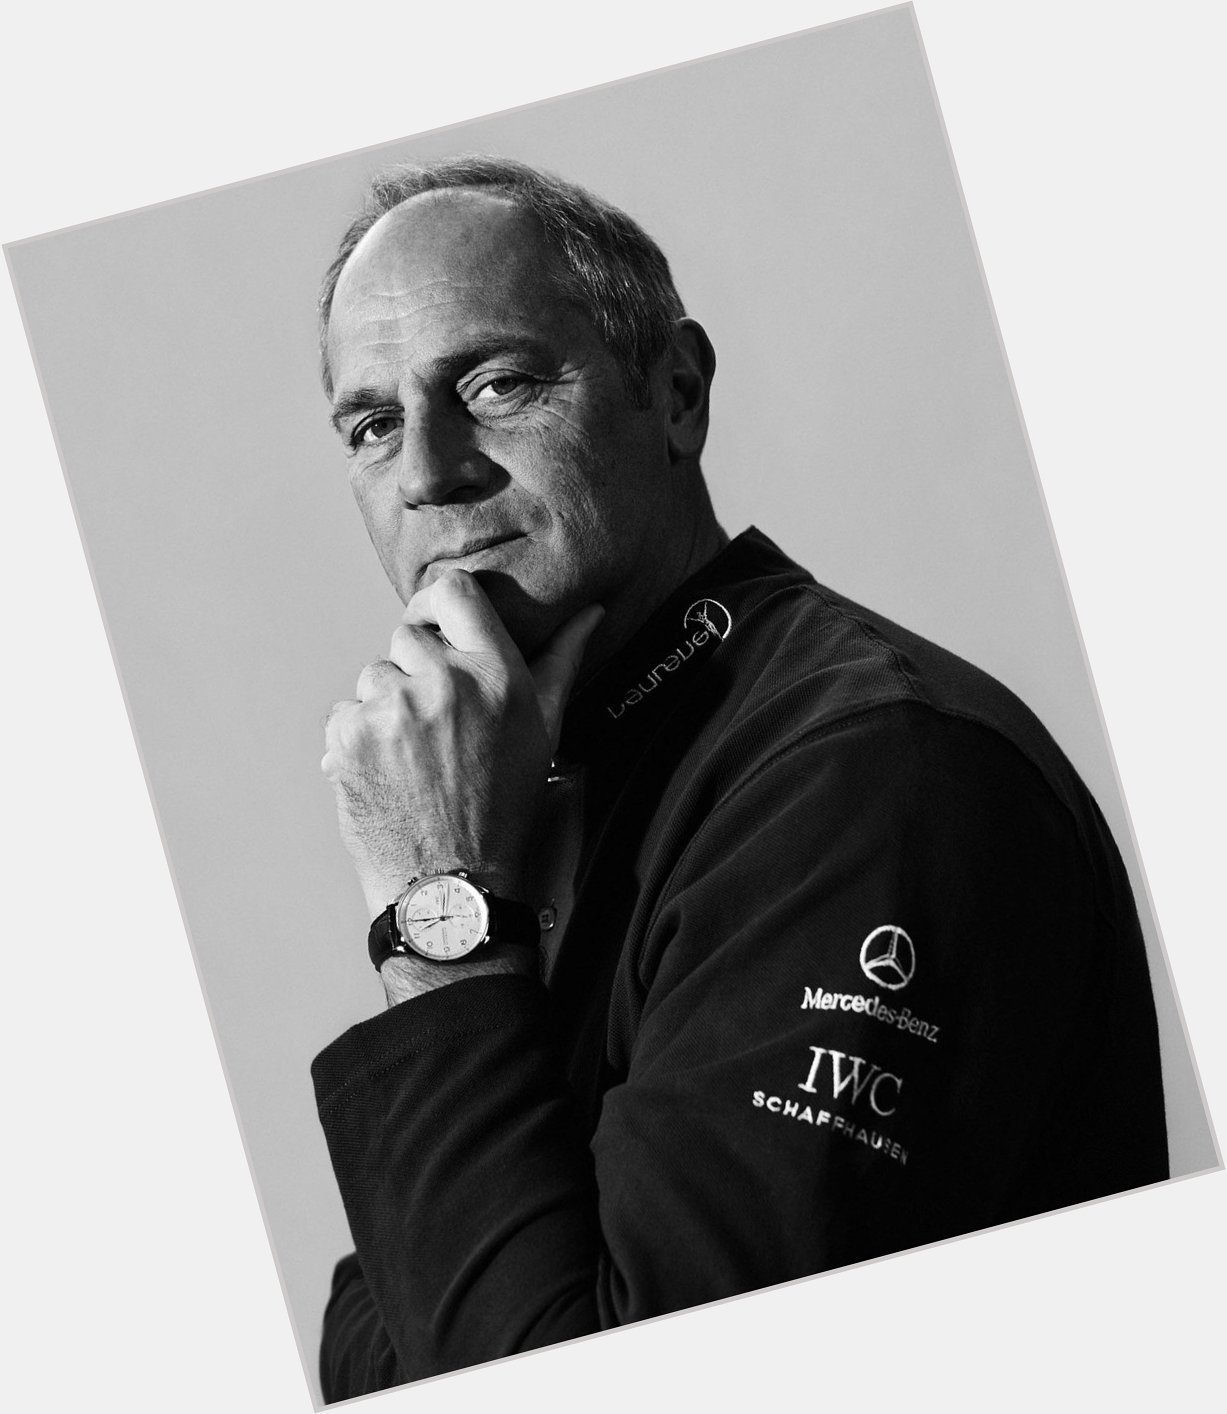 Good morning and Happy Birthday to Sir Steve Redgrave! 